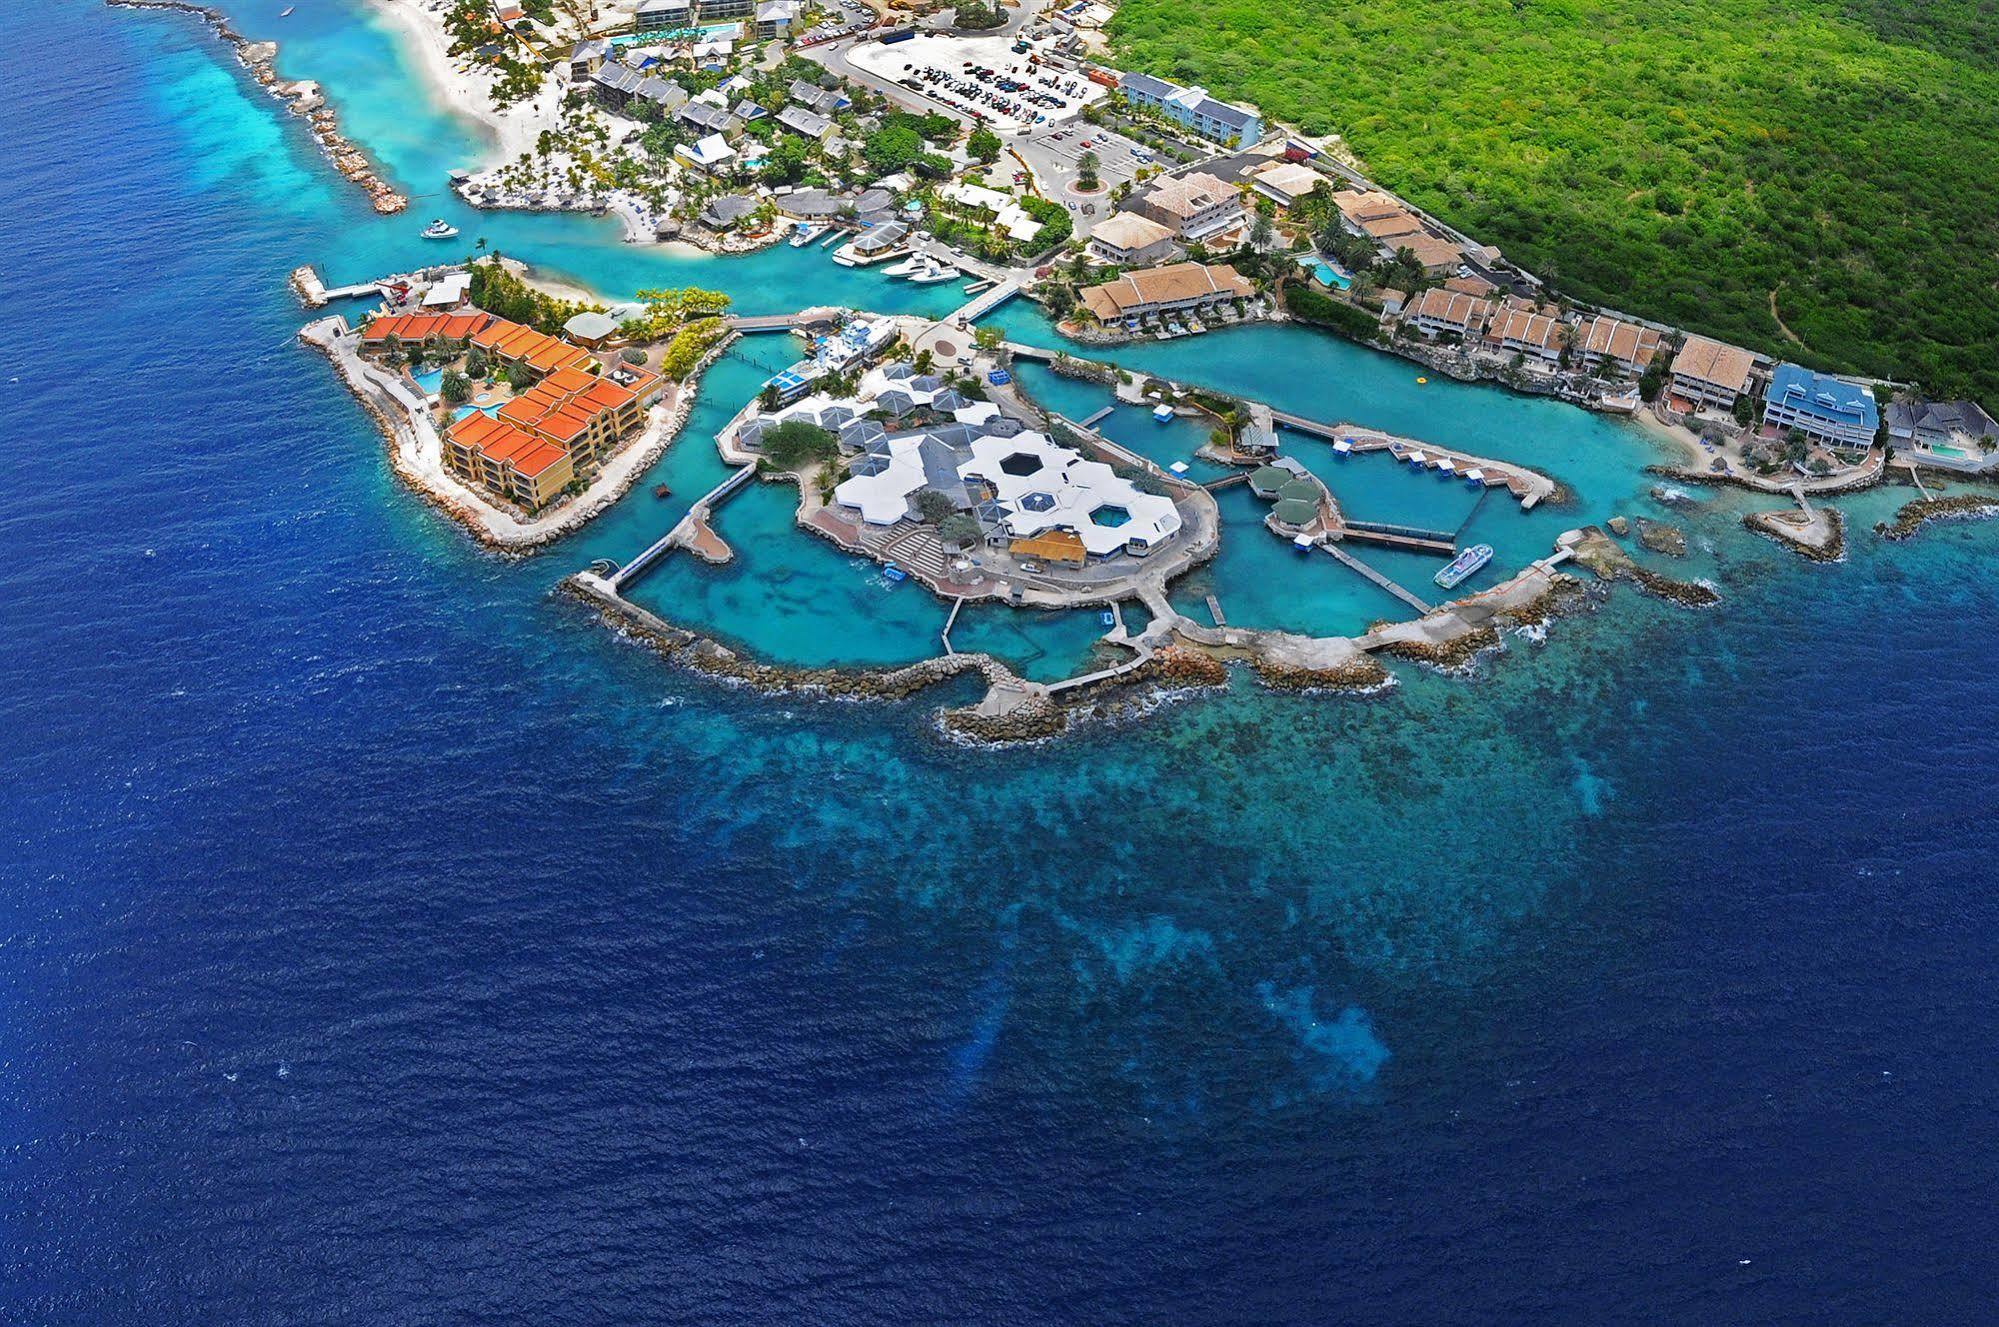 Dolphin Suites & Wellness Curacao Willemstad Exterior photo